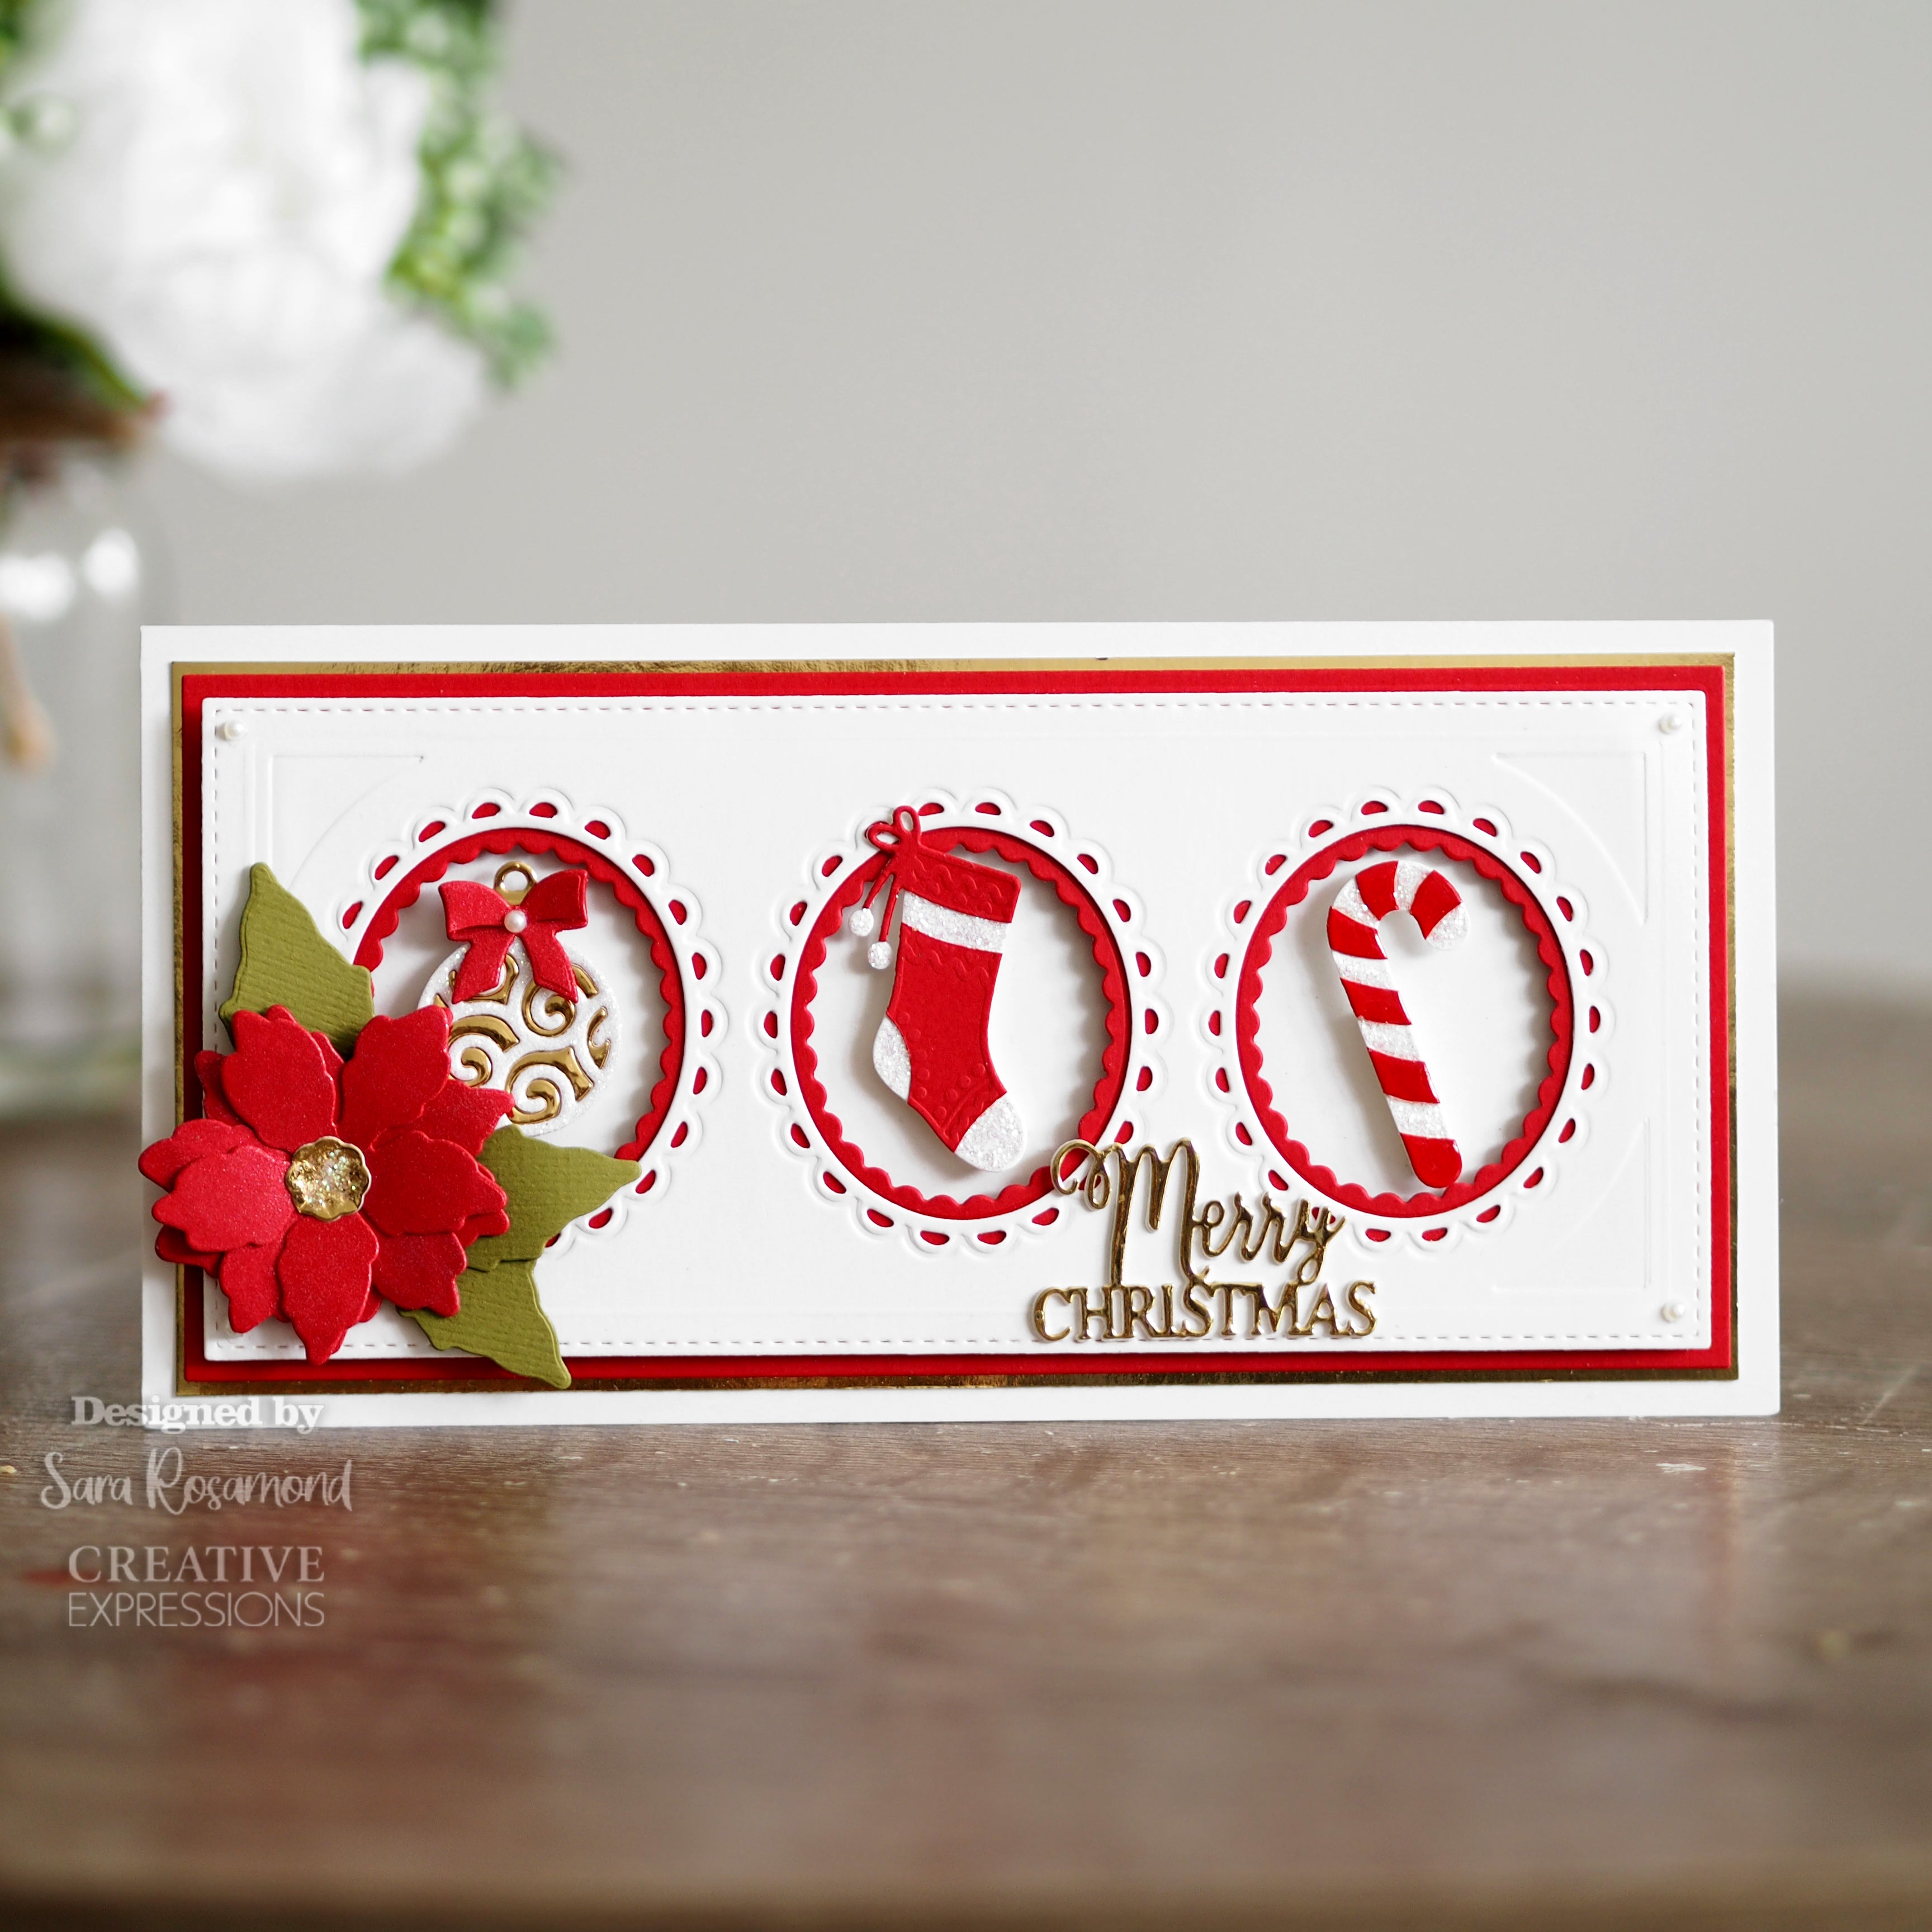 Creative Expressions Sue Wilson Mini Expressions Merry Christmas Craft Die